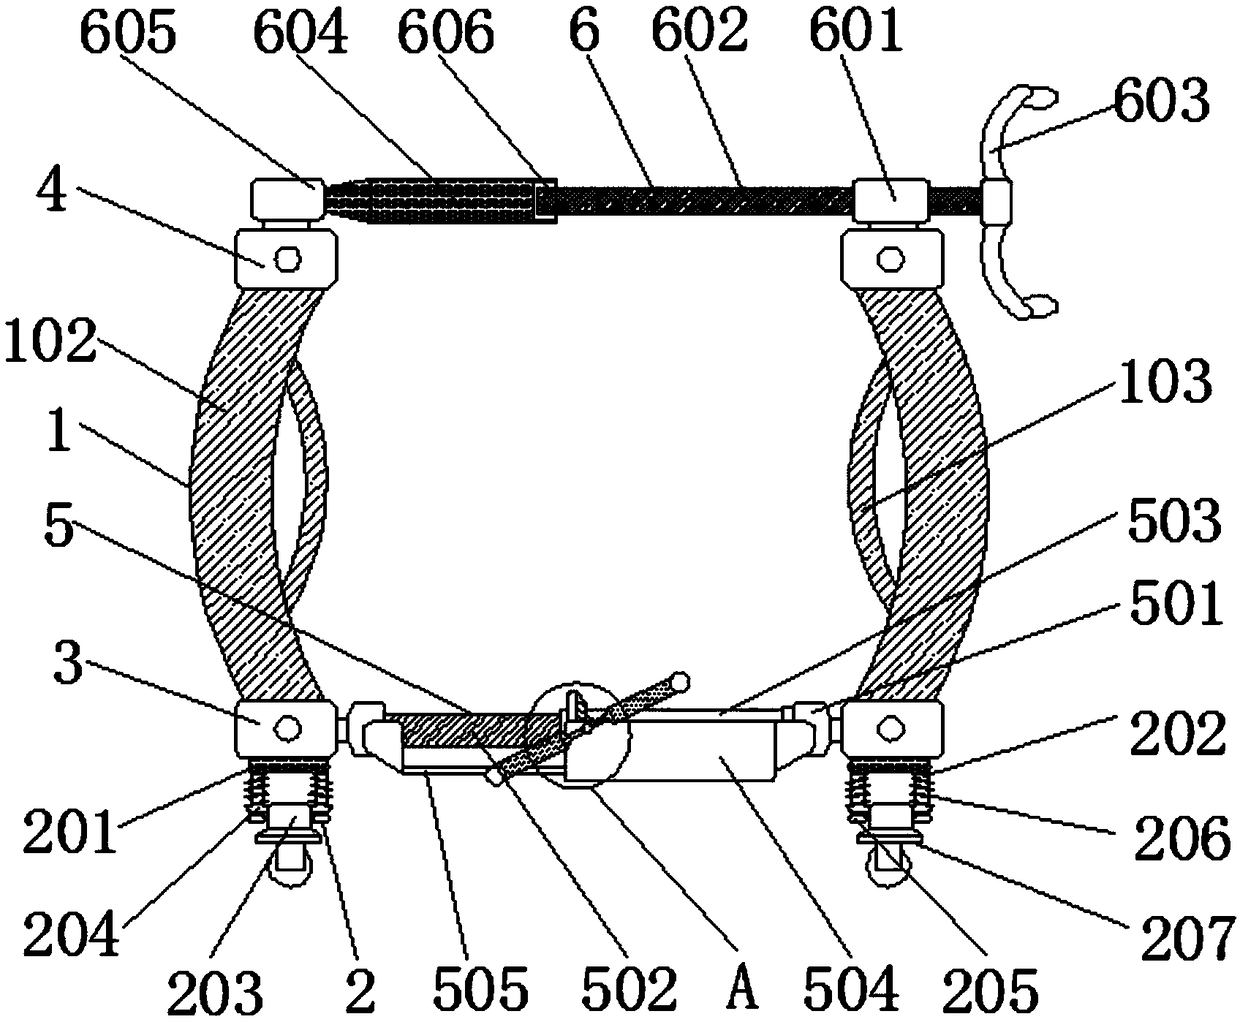 Square flowerpot carrying device lifted through lever principle in labor-saving method